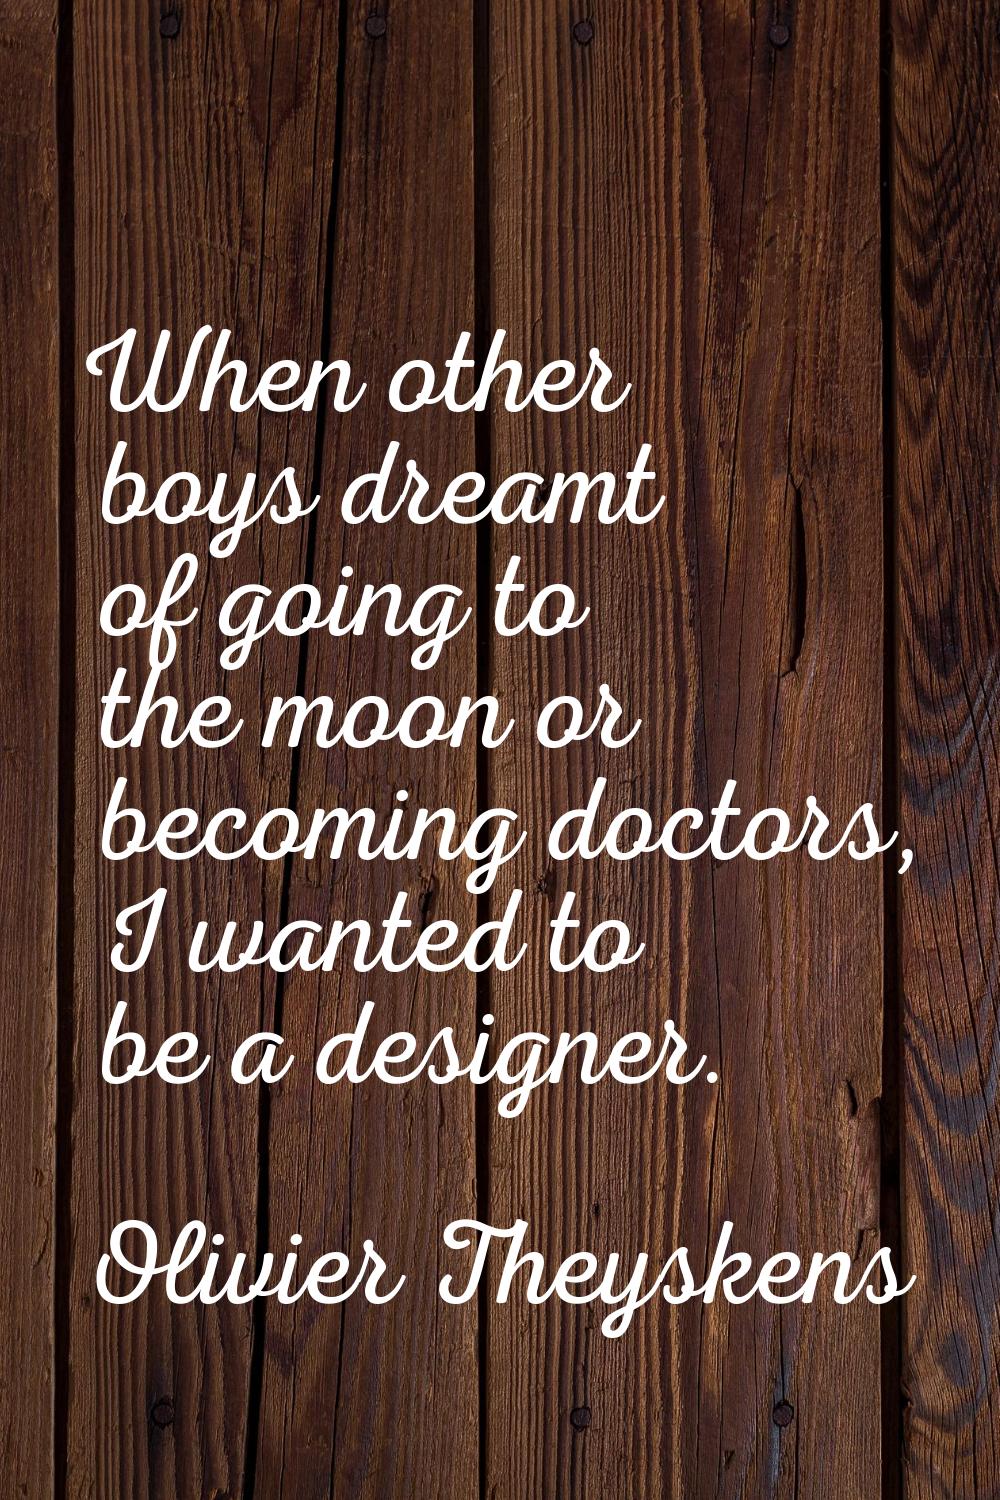 When other boys dreamt of going to the moon or becoming doctors, I wanted to be a designer.